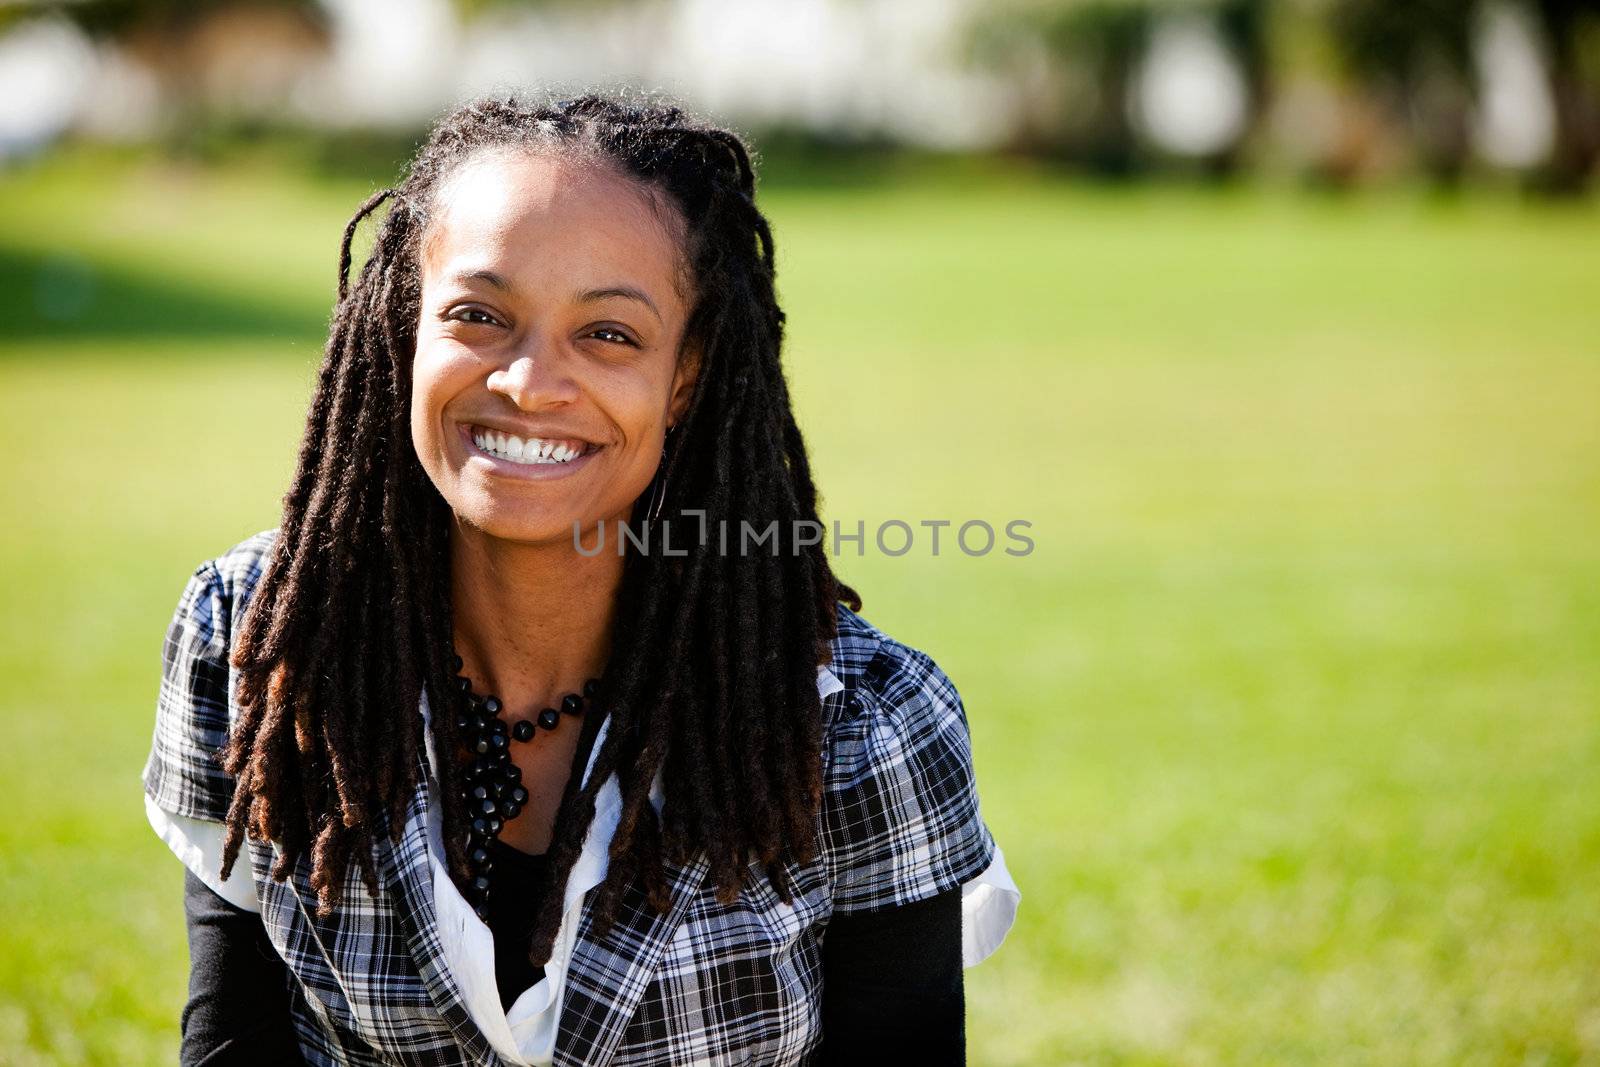 A beautiful African American with candid smile